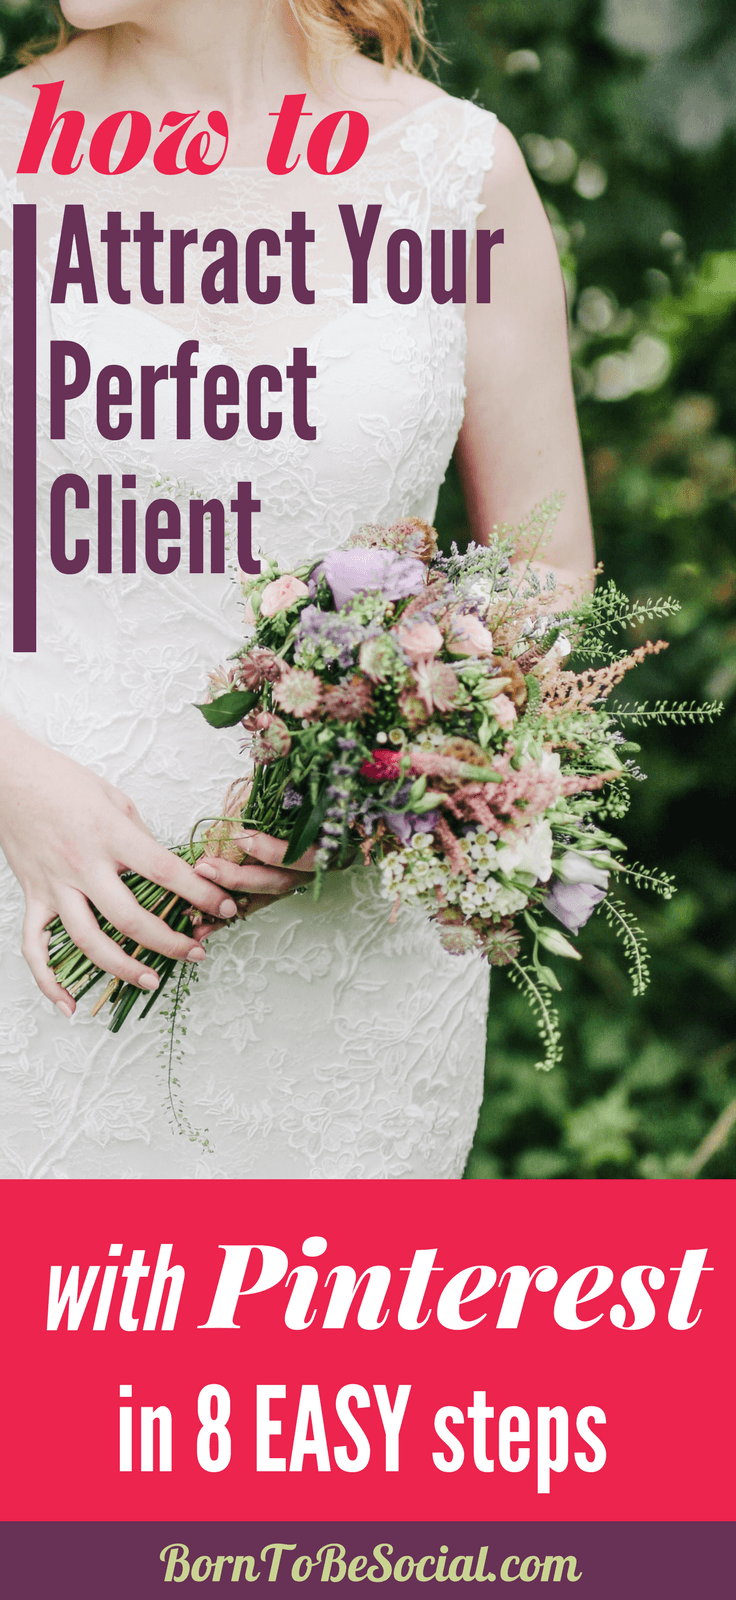 HOW TO FIND WEDDING CLIENTS WITH PINTEREST for Hotel Wedding Venues, Wedding Planners & Photographers - 8-Step Checklist & Action Plan. Your perfect clients spend a LOT of time on Pinterest planning their perfect wedding and wedding reception, but are they finding their way to the wedding services on your website? | via @BornToBeSocial, Pinterest Marketing & Consulting #PinterestExpert #PinterestWedding #ukweddingvenues #ChateauWedding  #PinterestForBusiness #PinterestMarketingTips